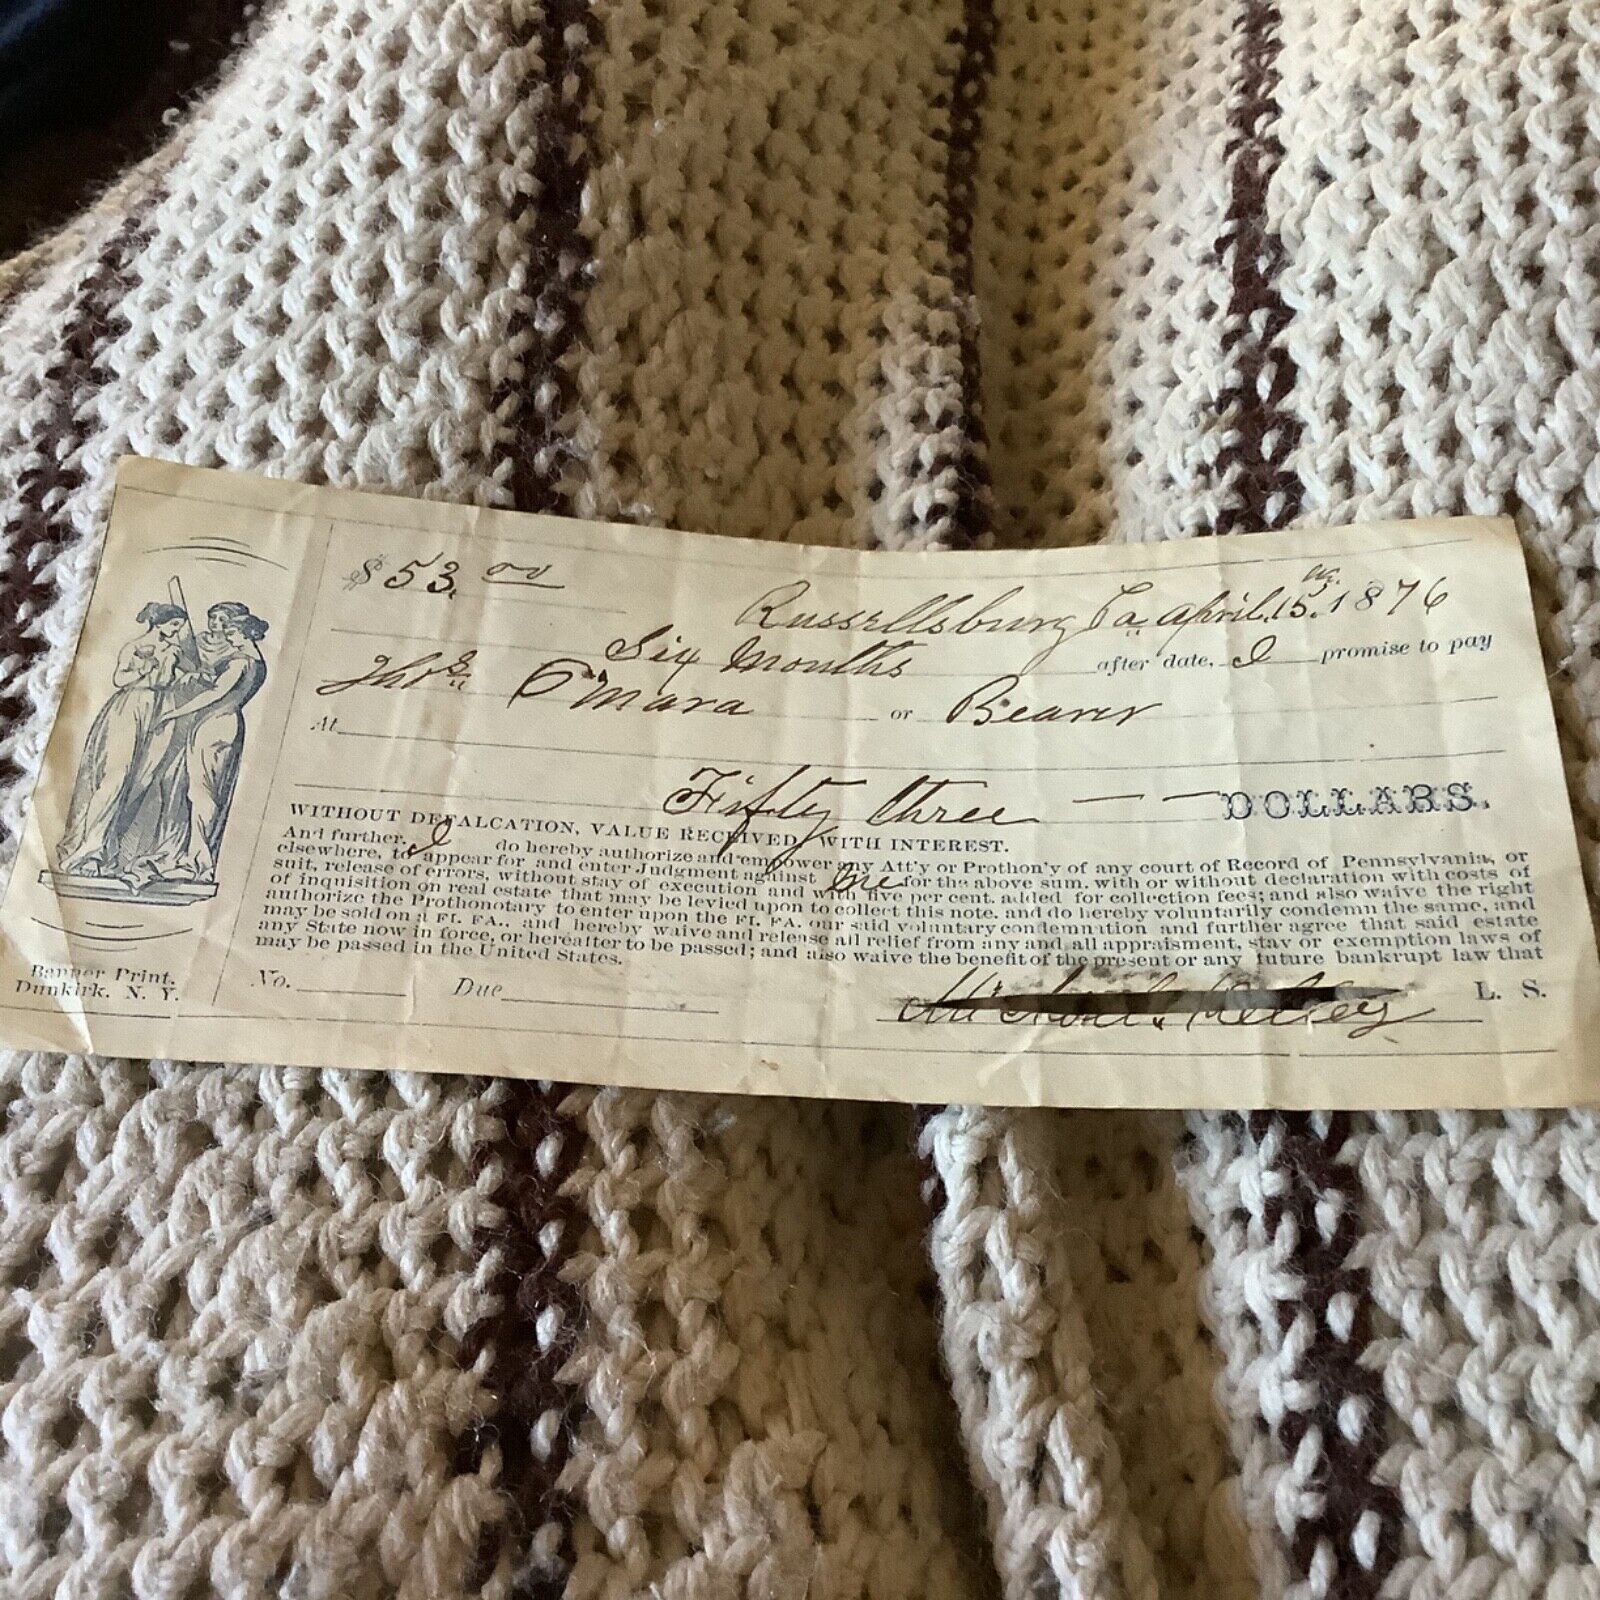 VINTAGE 1876 BEARER NOTE FOR $53.00 FROM RUSSELLSBURG,PA